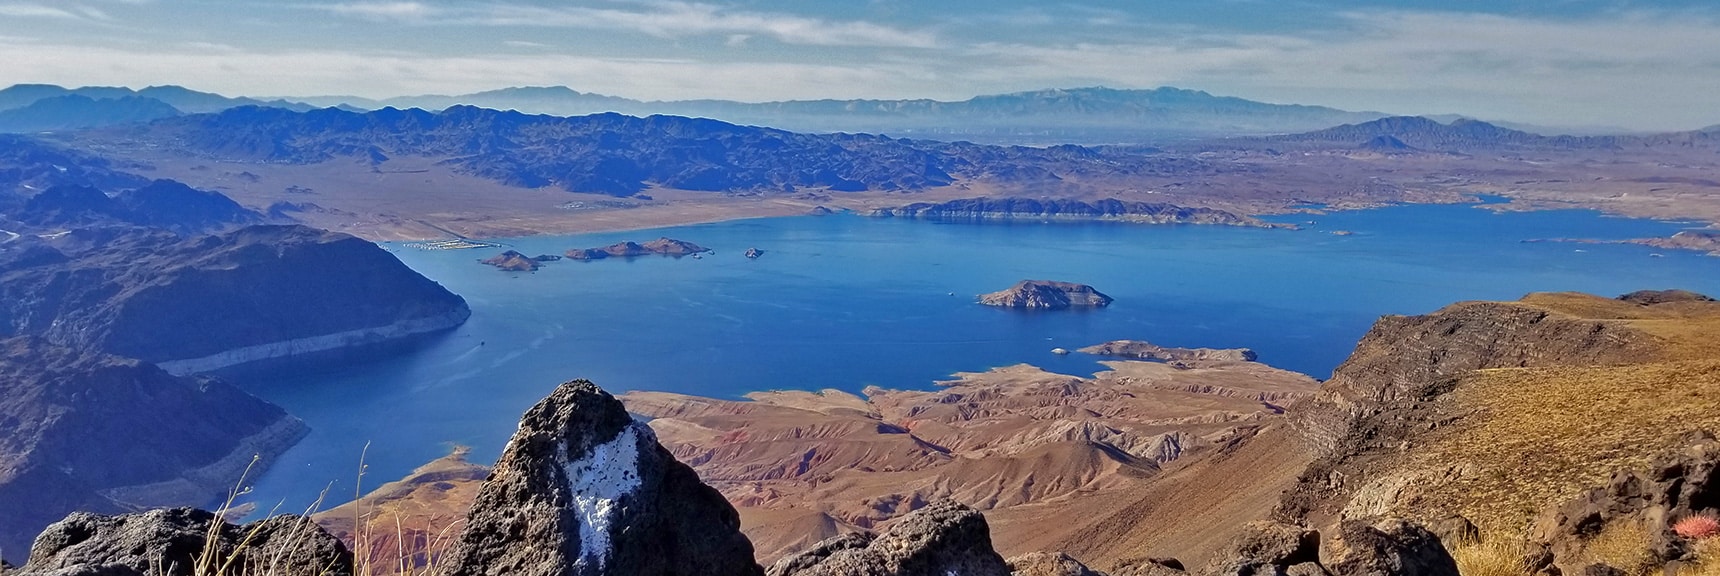 View of Lake Mead from Fortification Hill Summit | Fortification Hill | Lake Mead National Recreation Area, Arizona